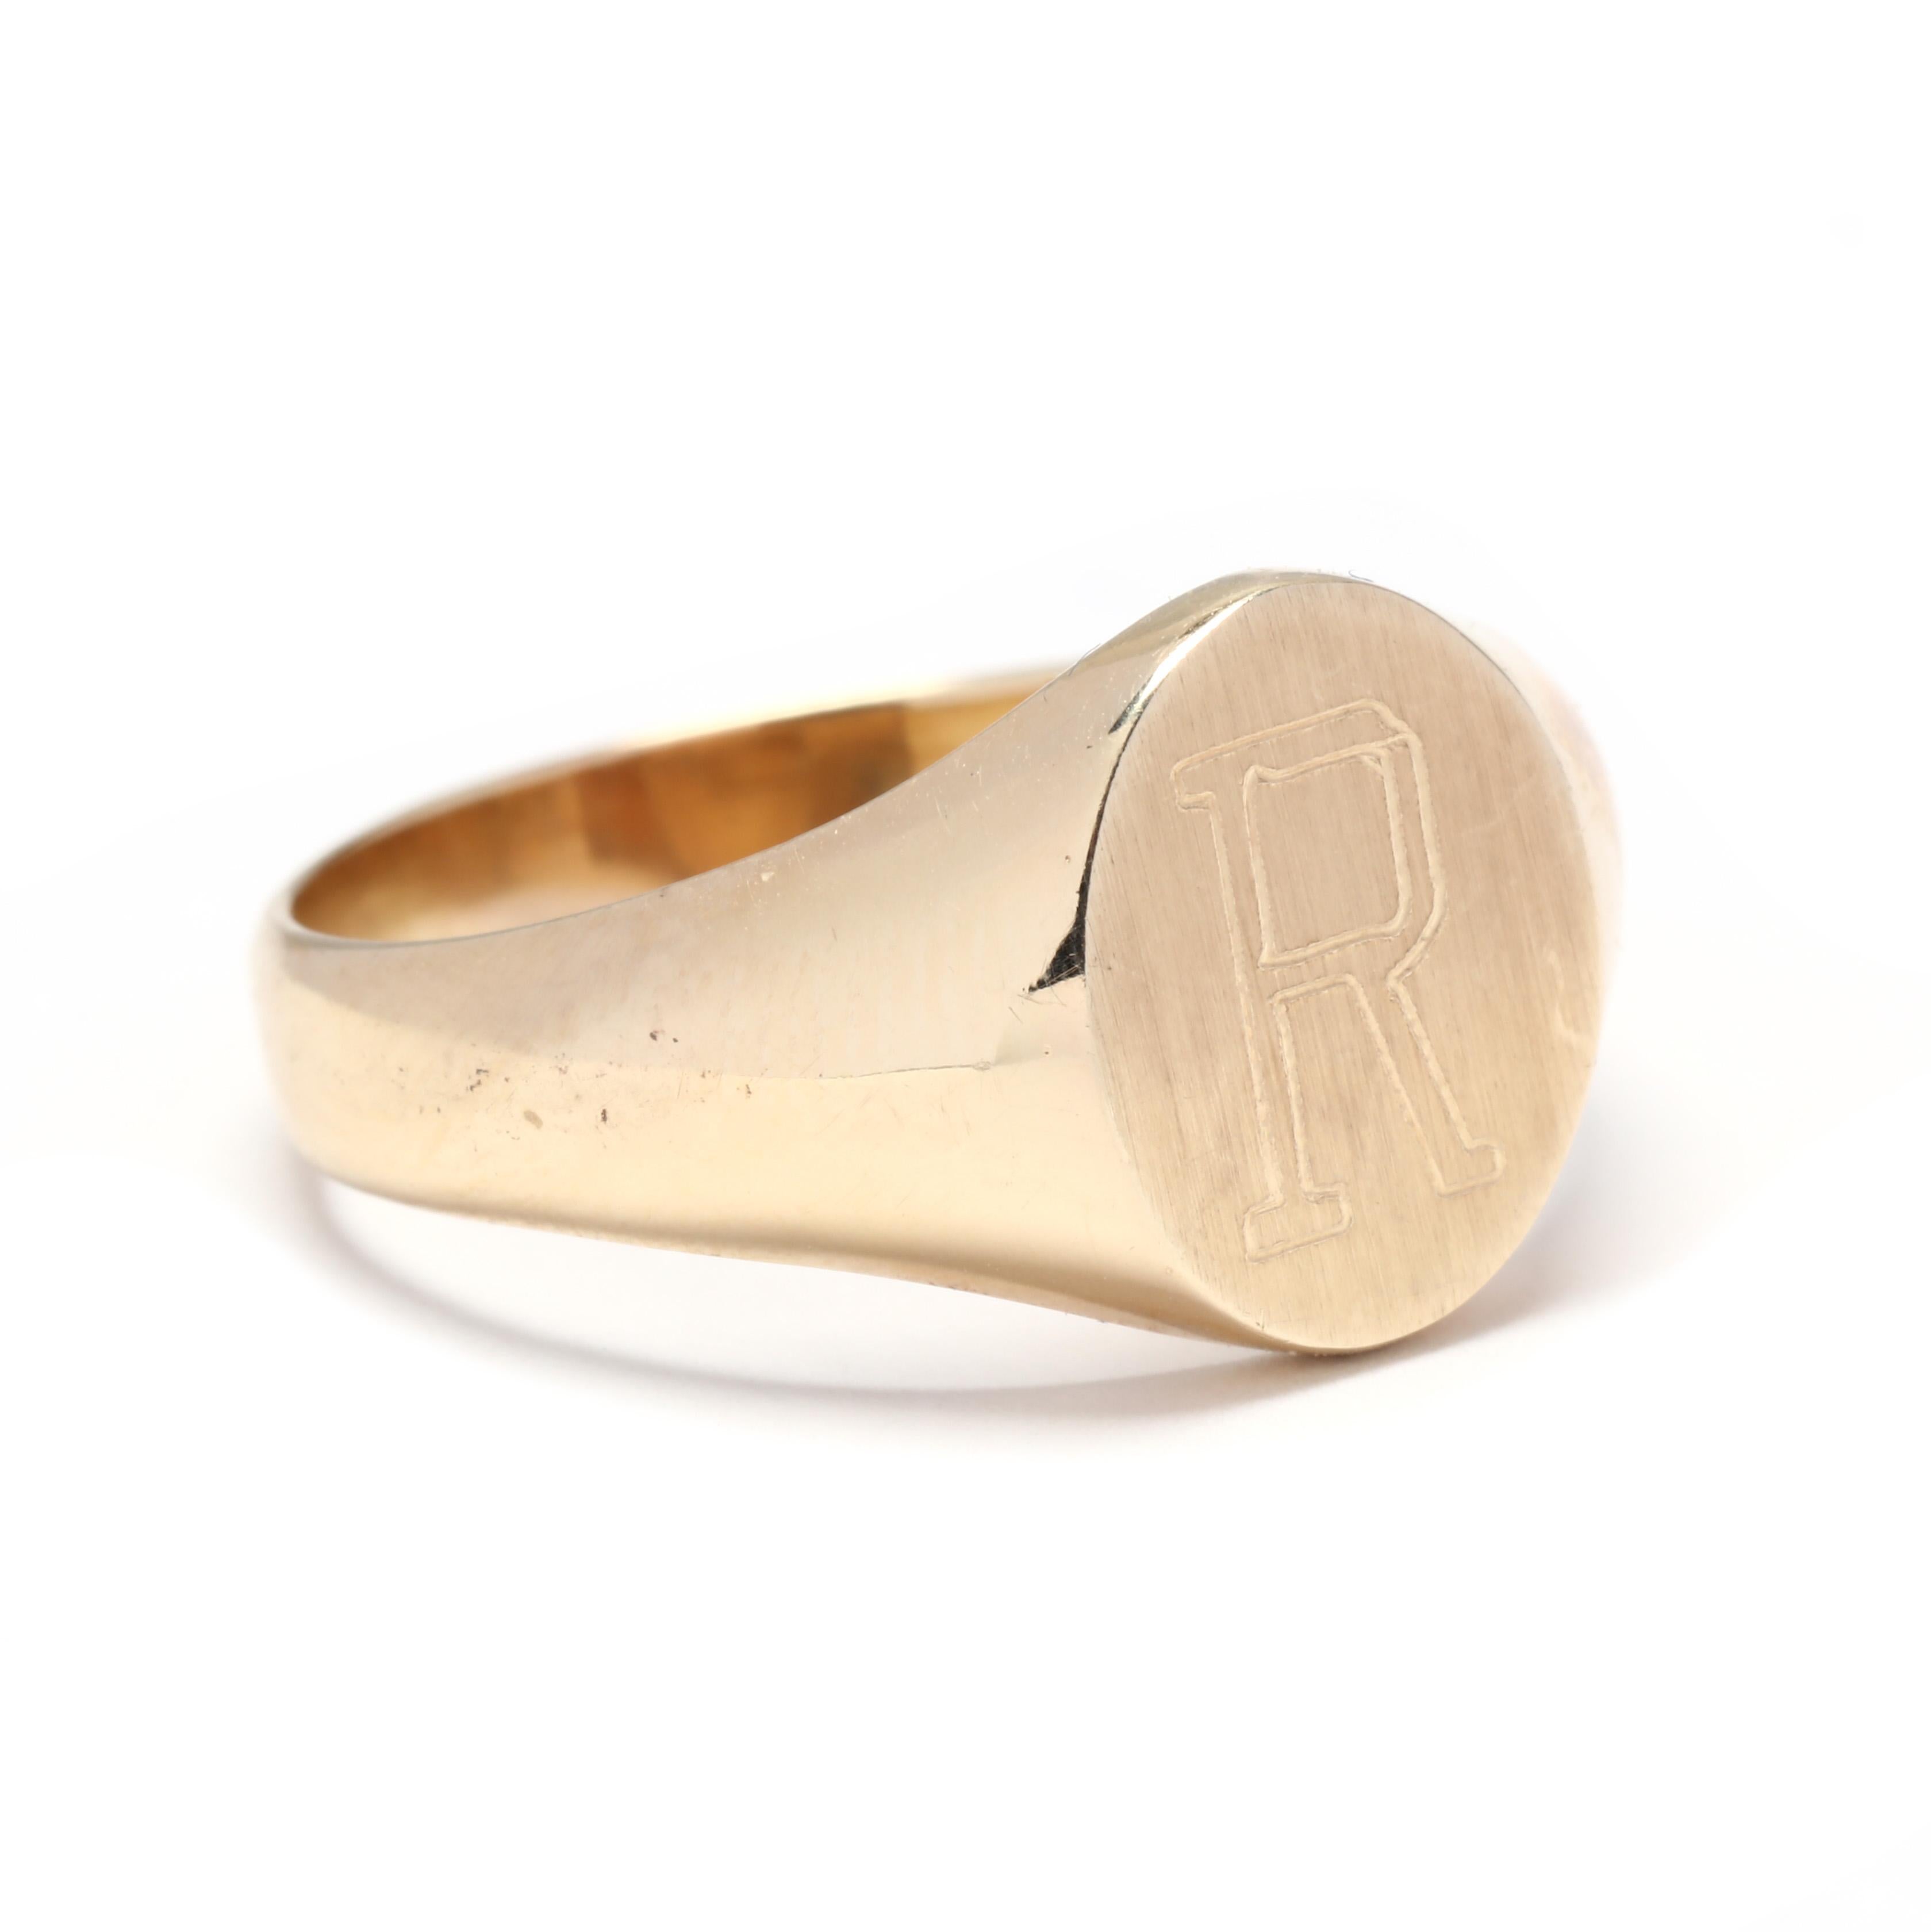 A vintage 14 karat yellow gold R signet ring. This ring features an oval tablet signet that is lightly engraved with a varsity letter R initial that can be removed and personalized for you! Please reach out to us with any questions!



Ring Size